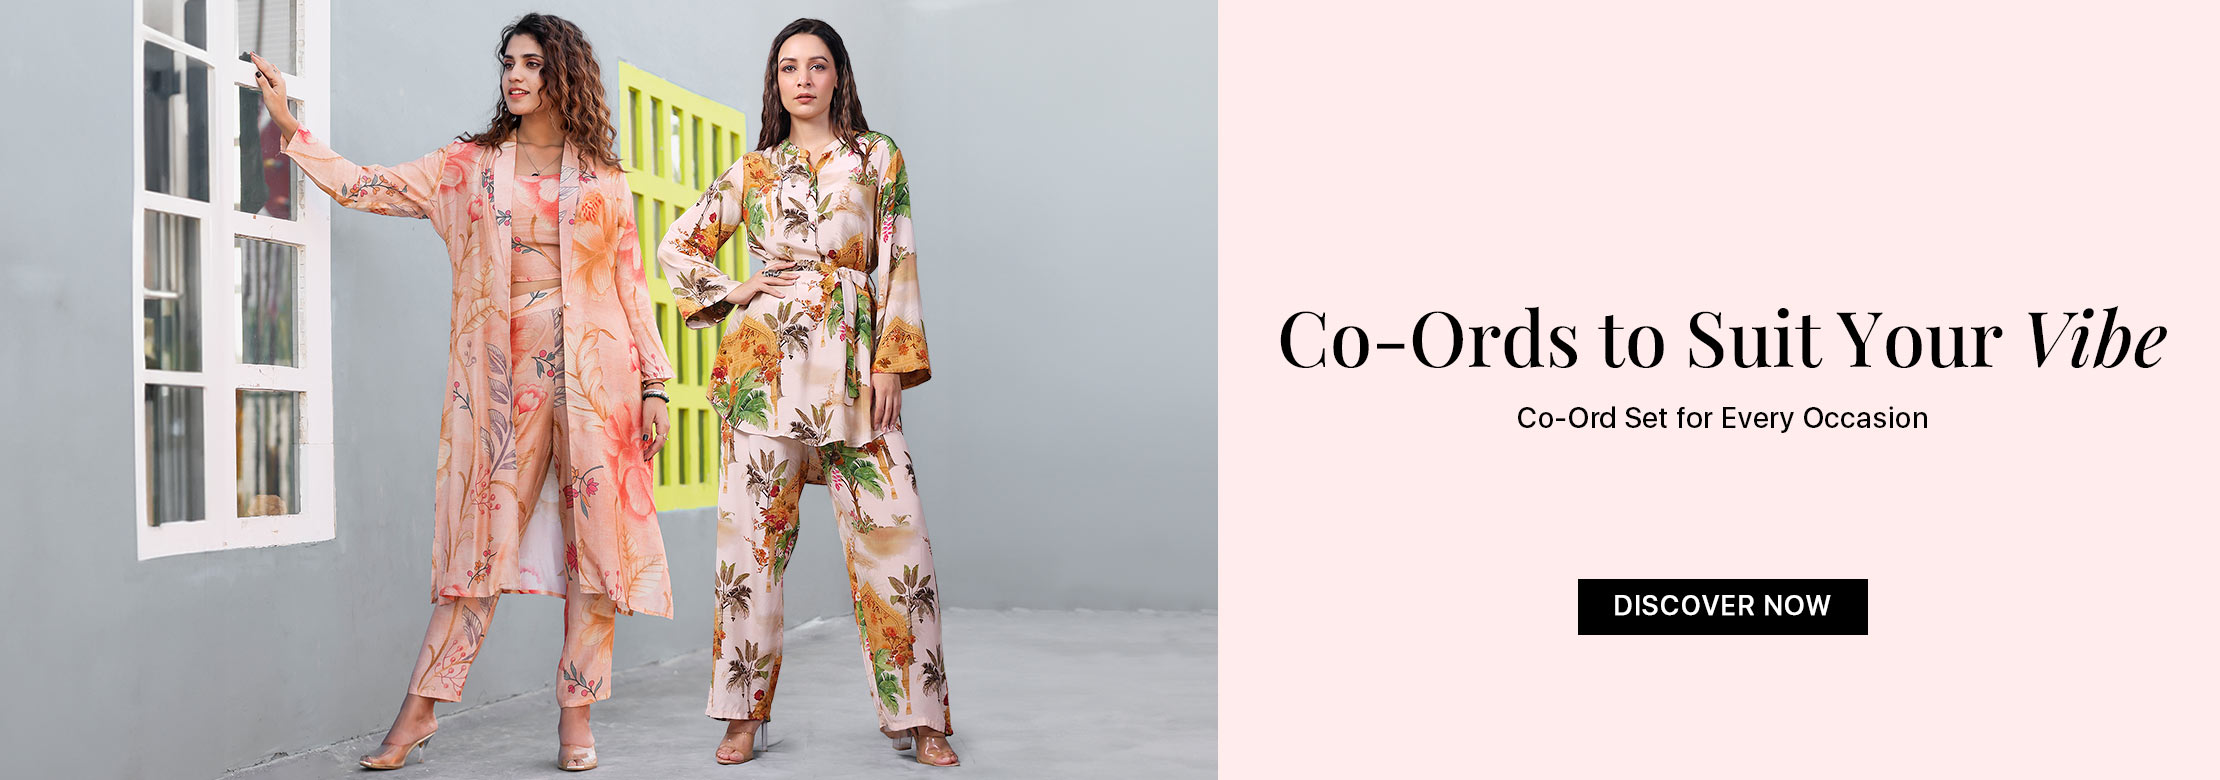 Co-Ord Set for Every Occasion